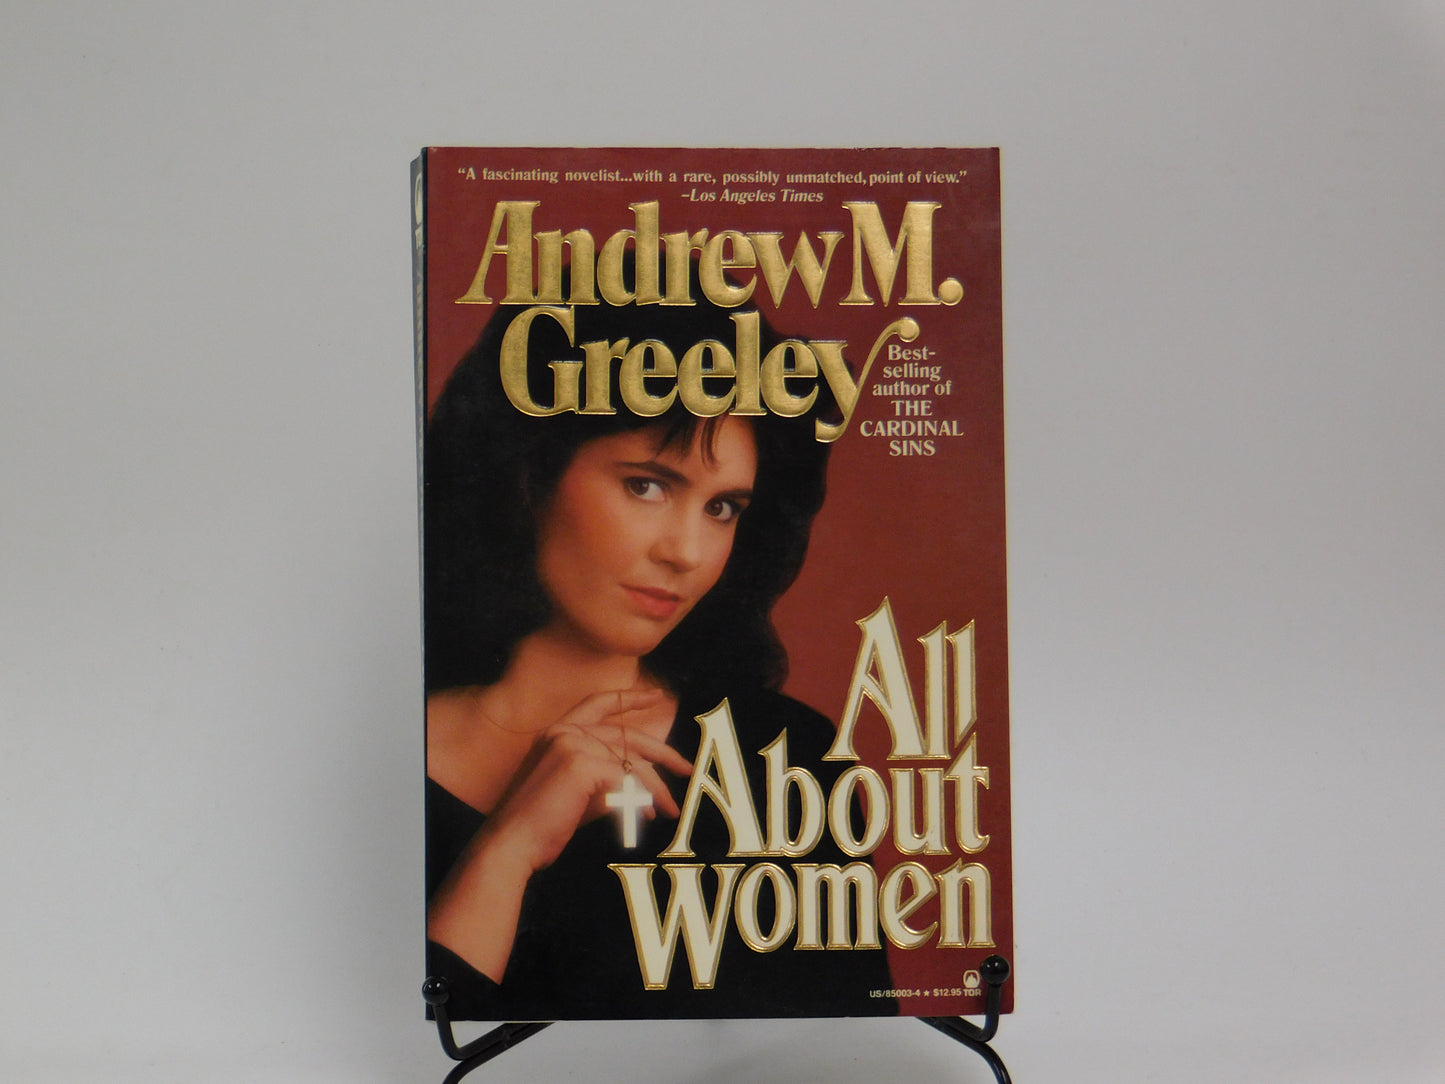 All About Women by Andrew M. Greeley